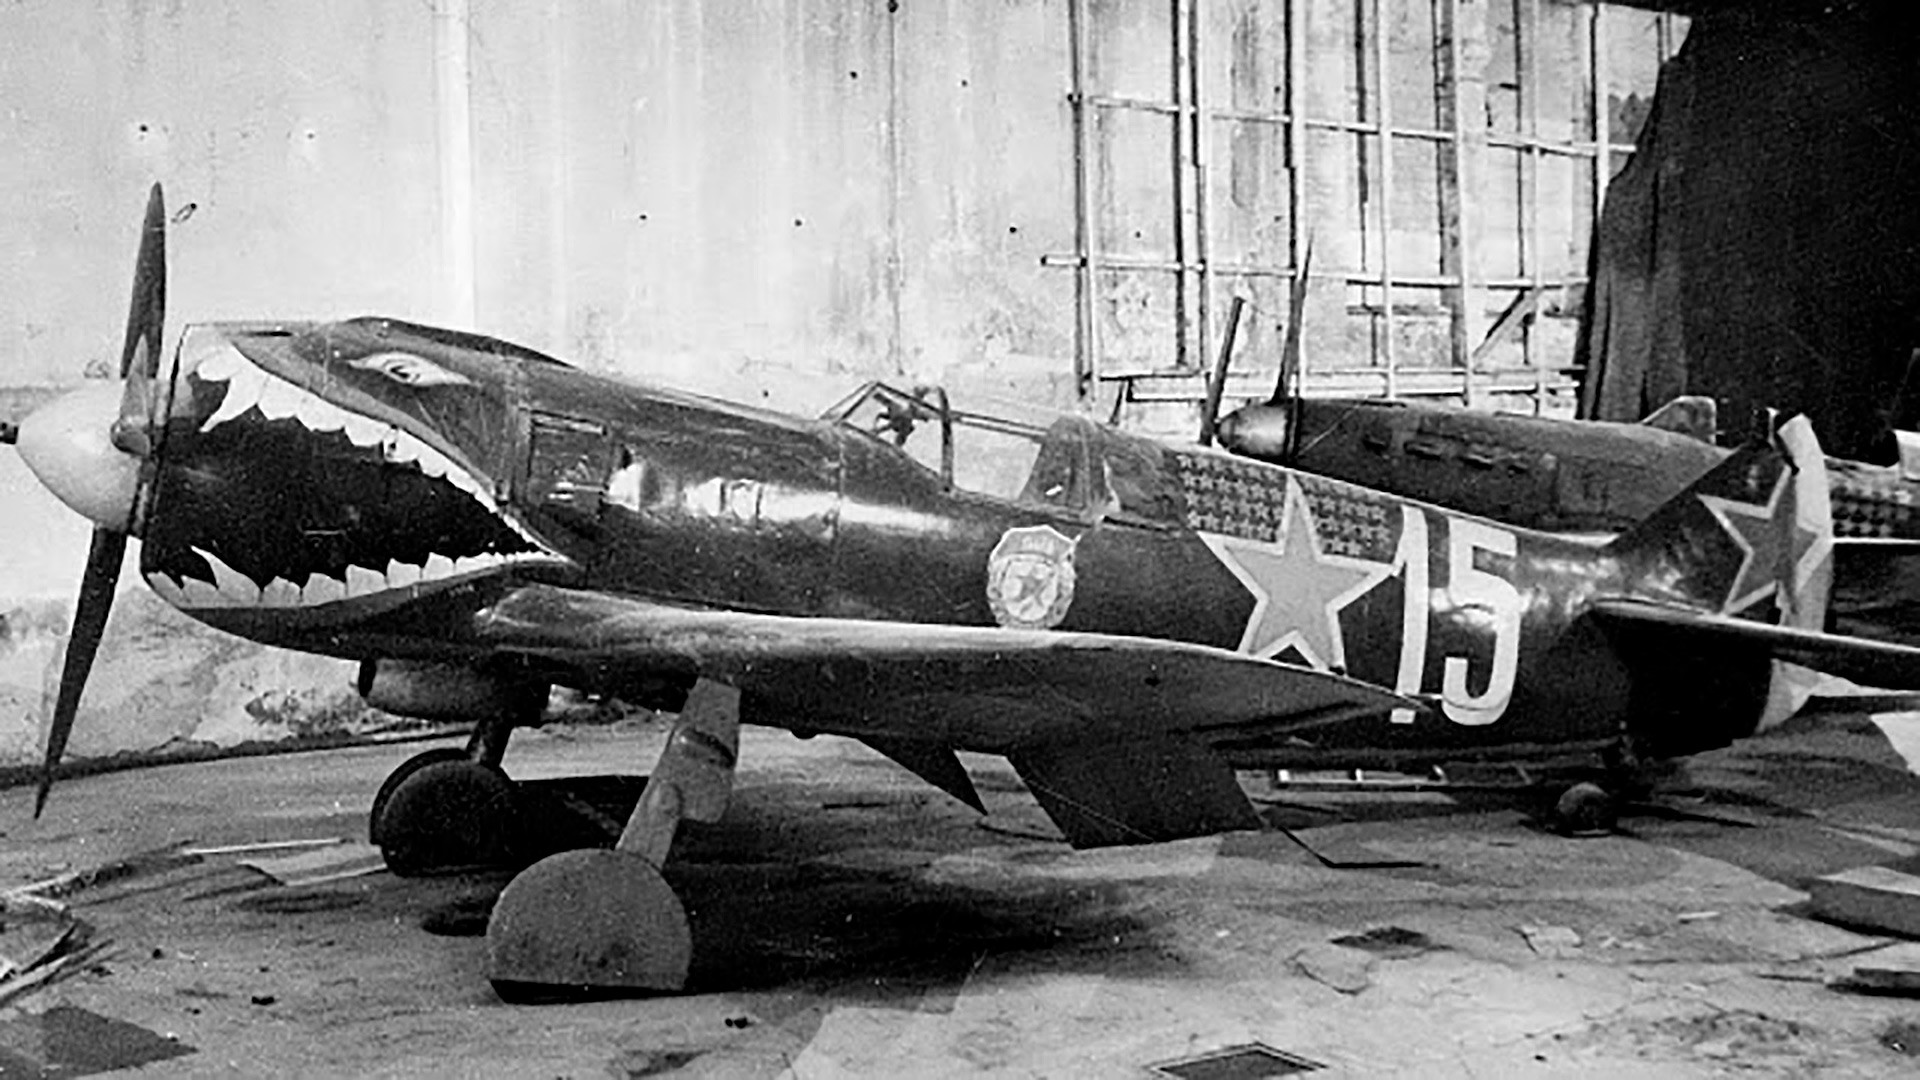 How did Soviet flying aces decorate their planes during World War II